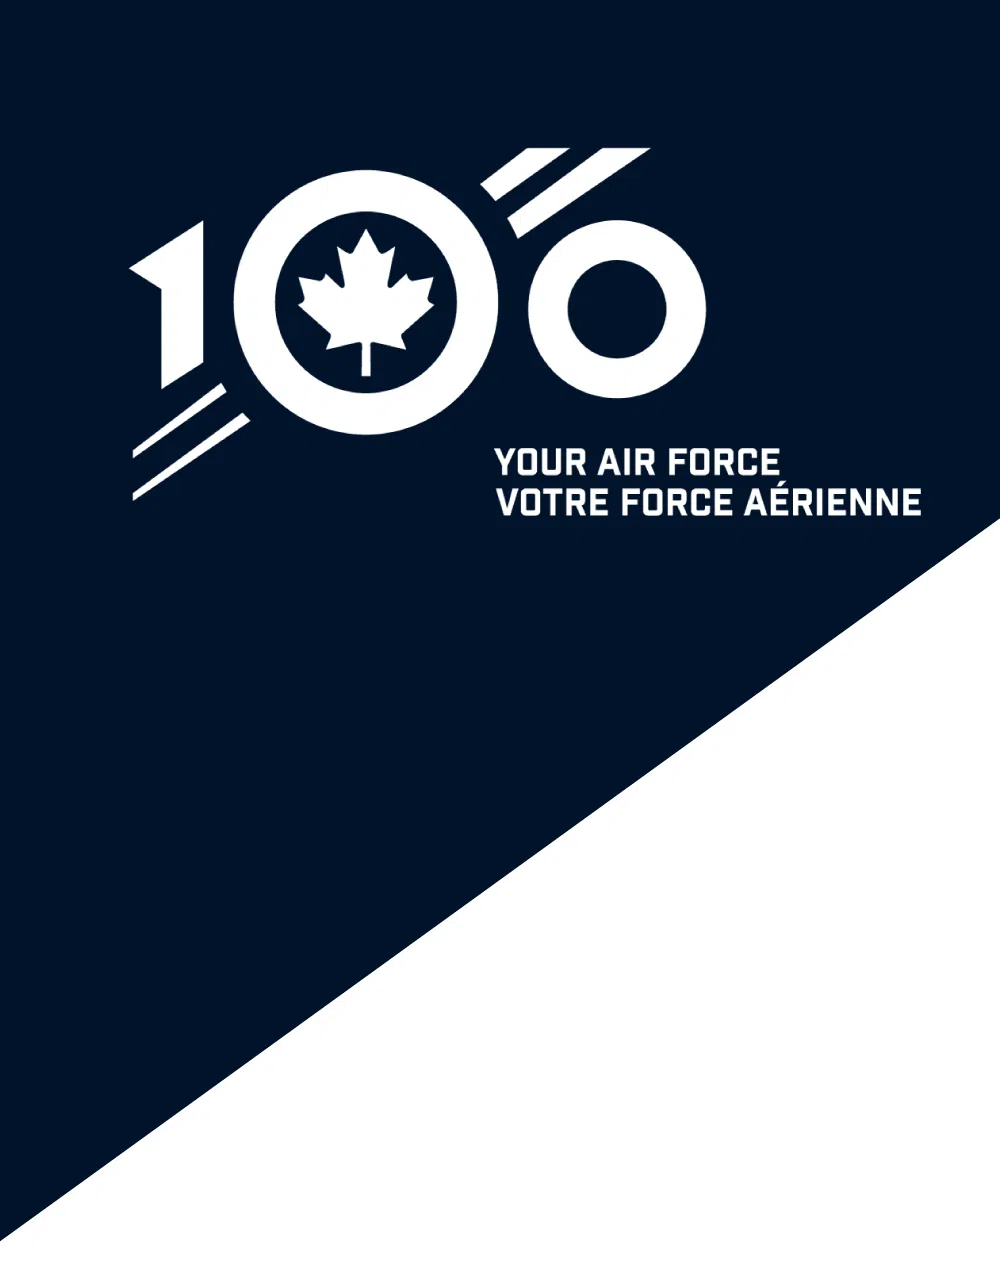 Parade, flag raising, Freedom of the City honour for RCAF 100th anniversary